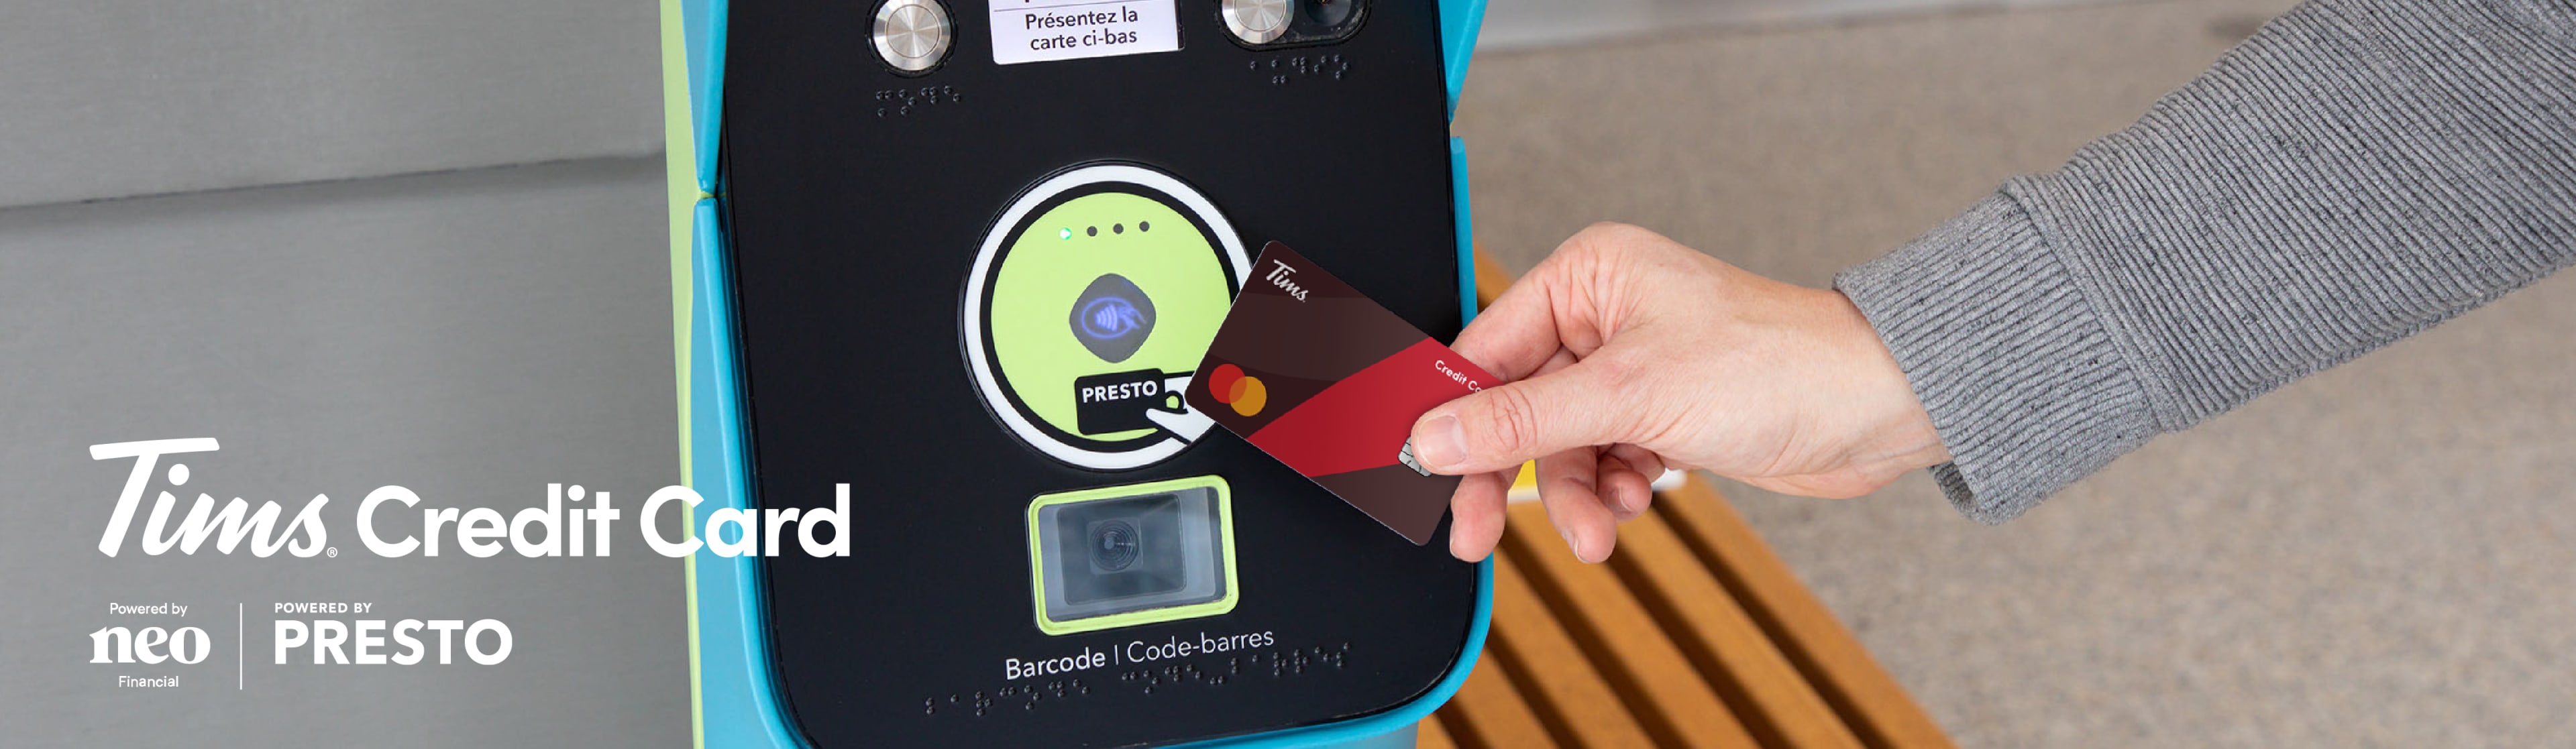 Tims® Financial credit card being tapped on an UP PRESTO device